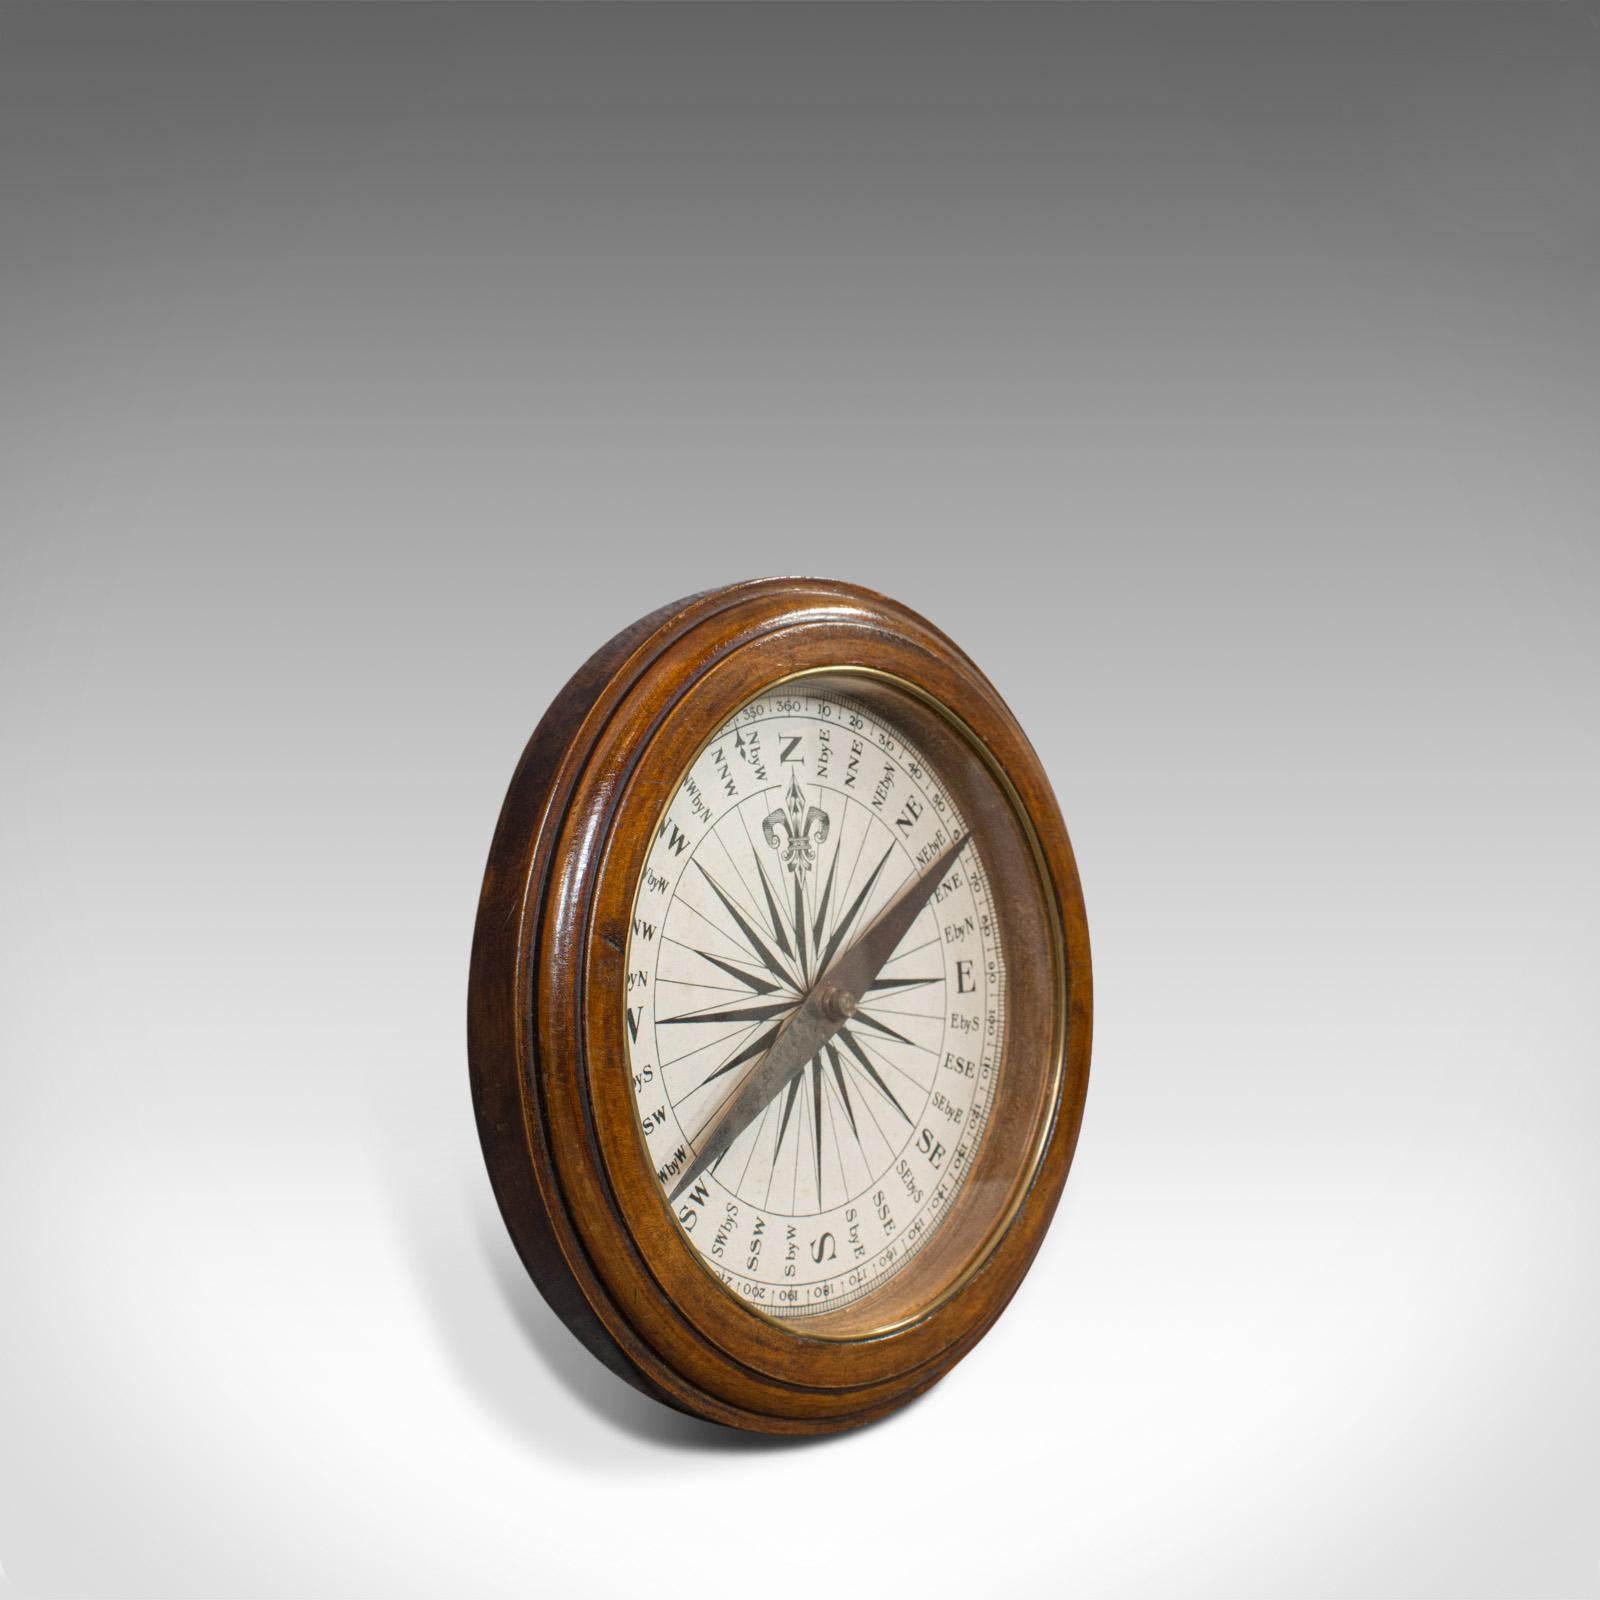 This is an antique desk compass. An English, oak maritime or ship's compass and dating to the Regency period, circa 1830.

Of fine form and bright, legible, sun-burst face - diameter of 17.5cm (7